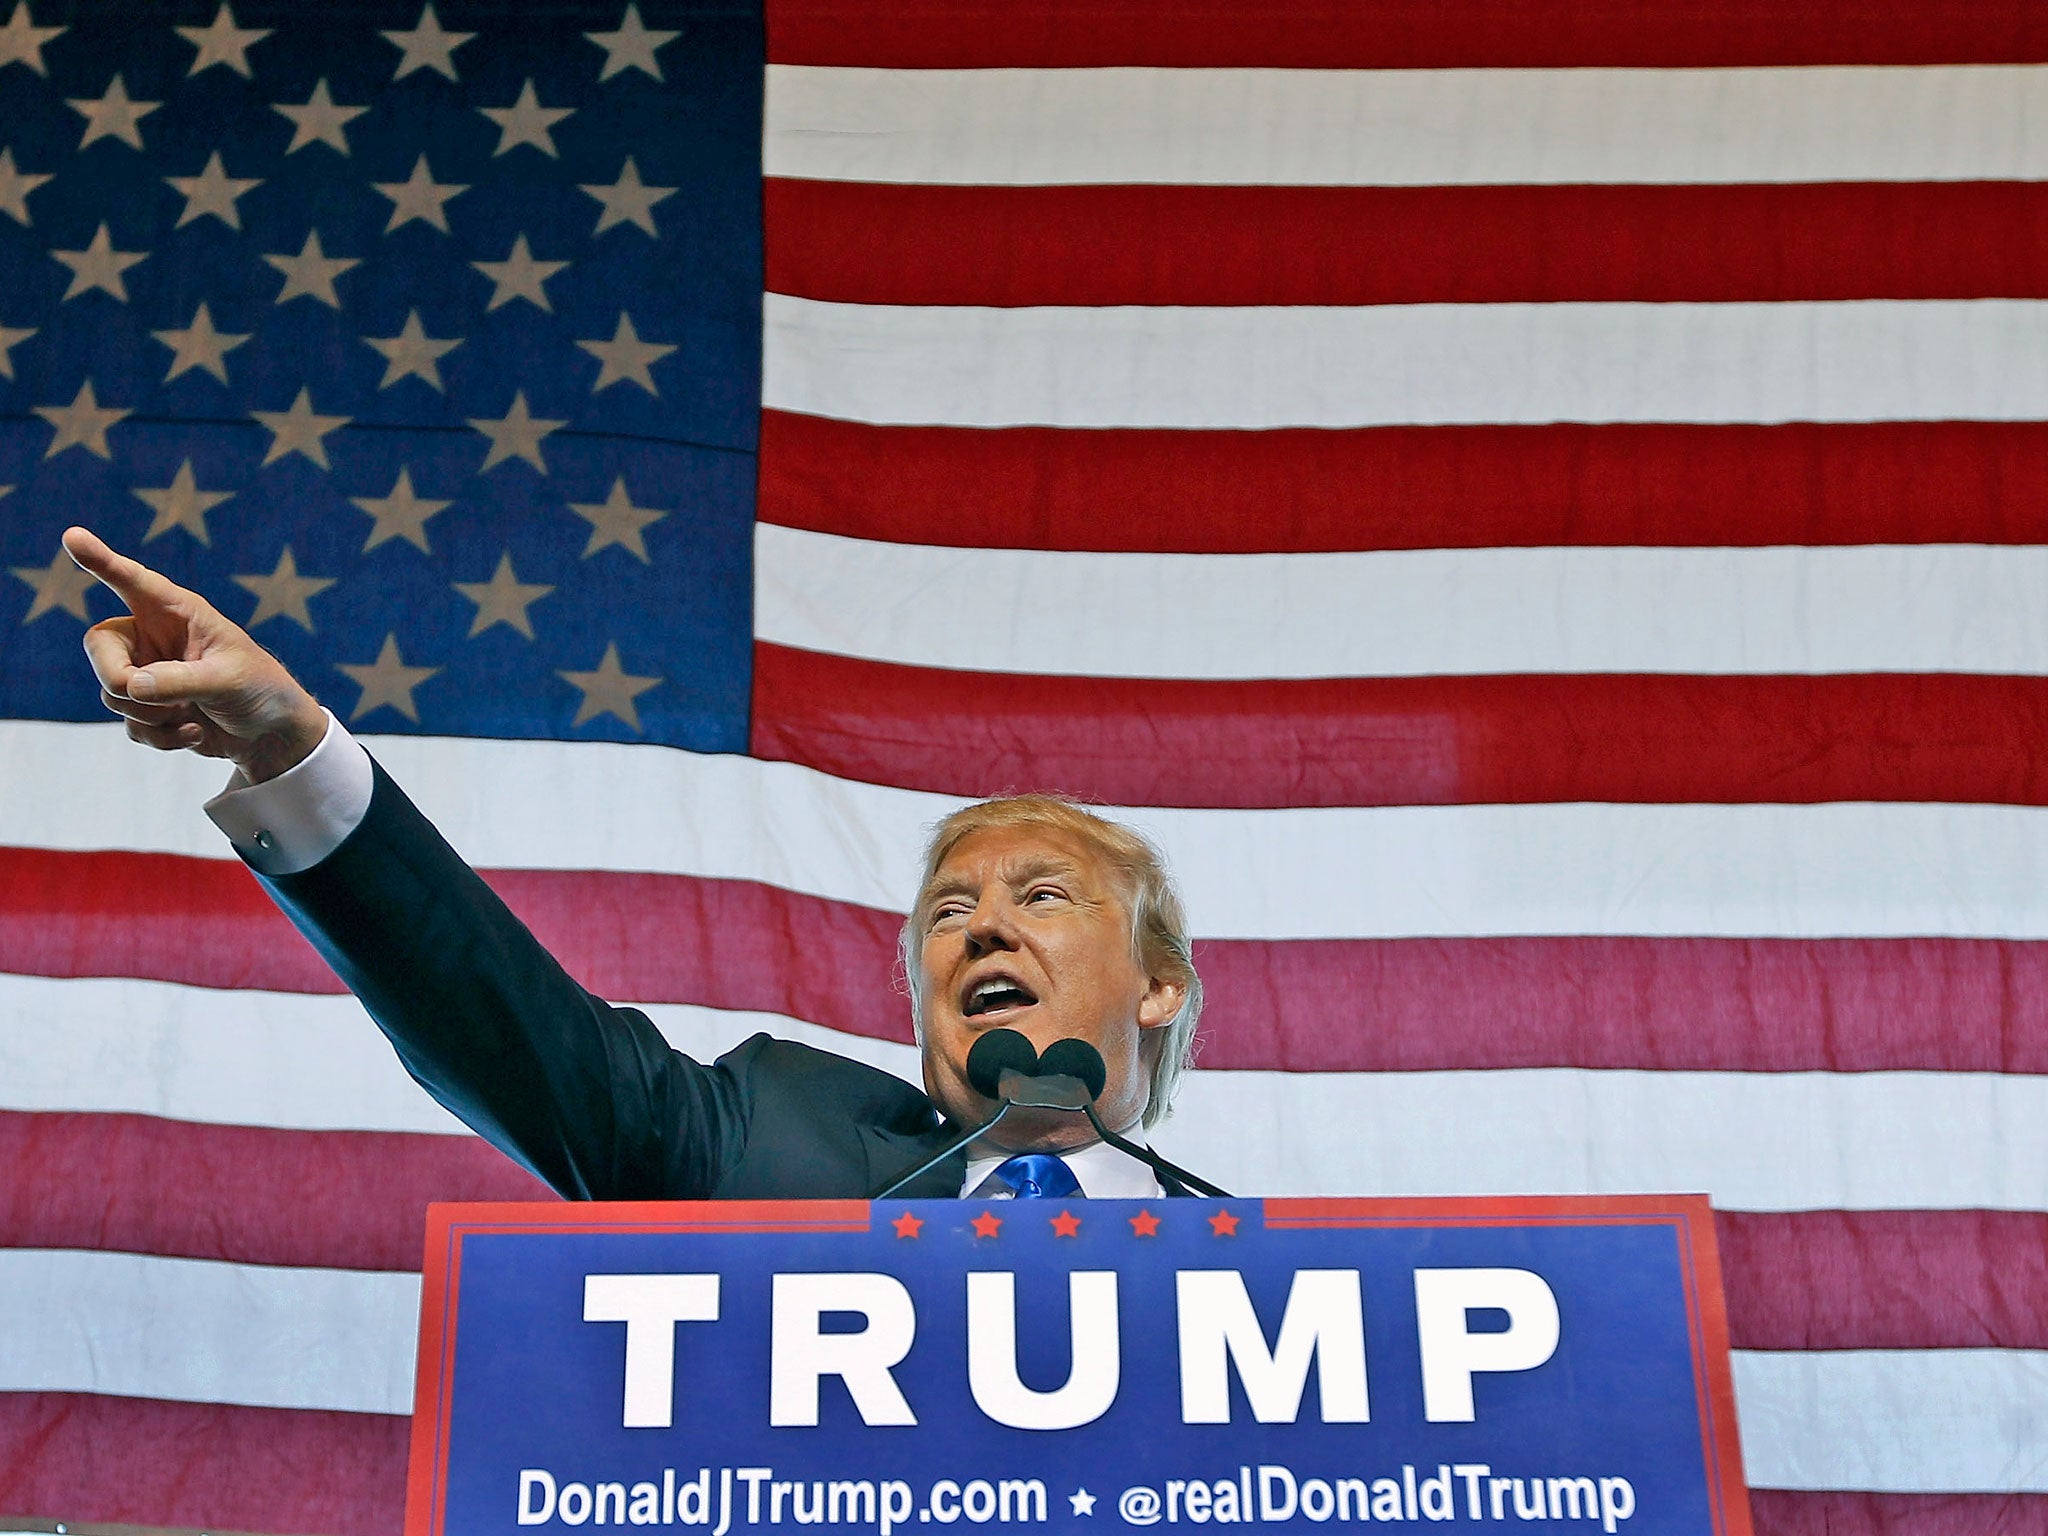 Businessman Donald Trump was recently named the Republican presidential candidate